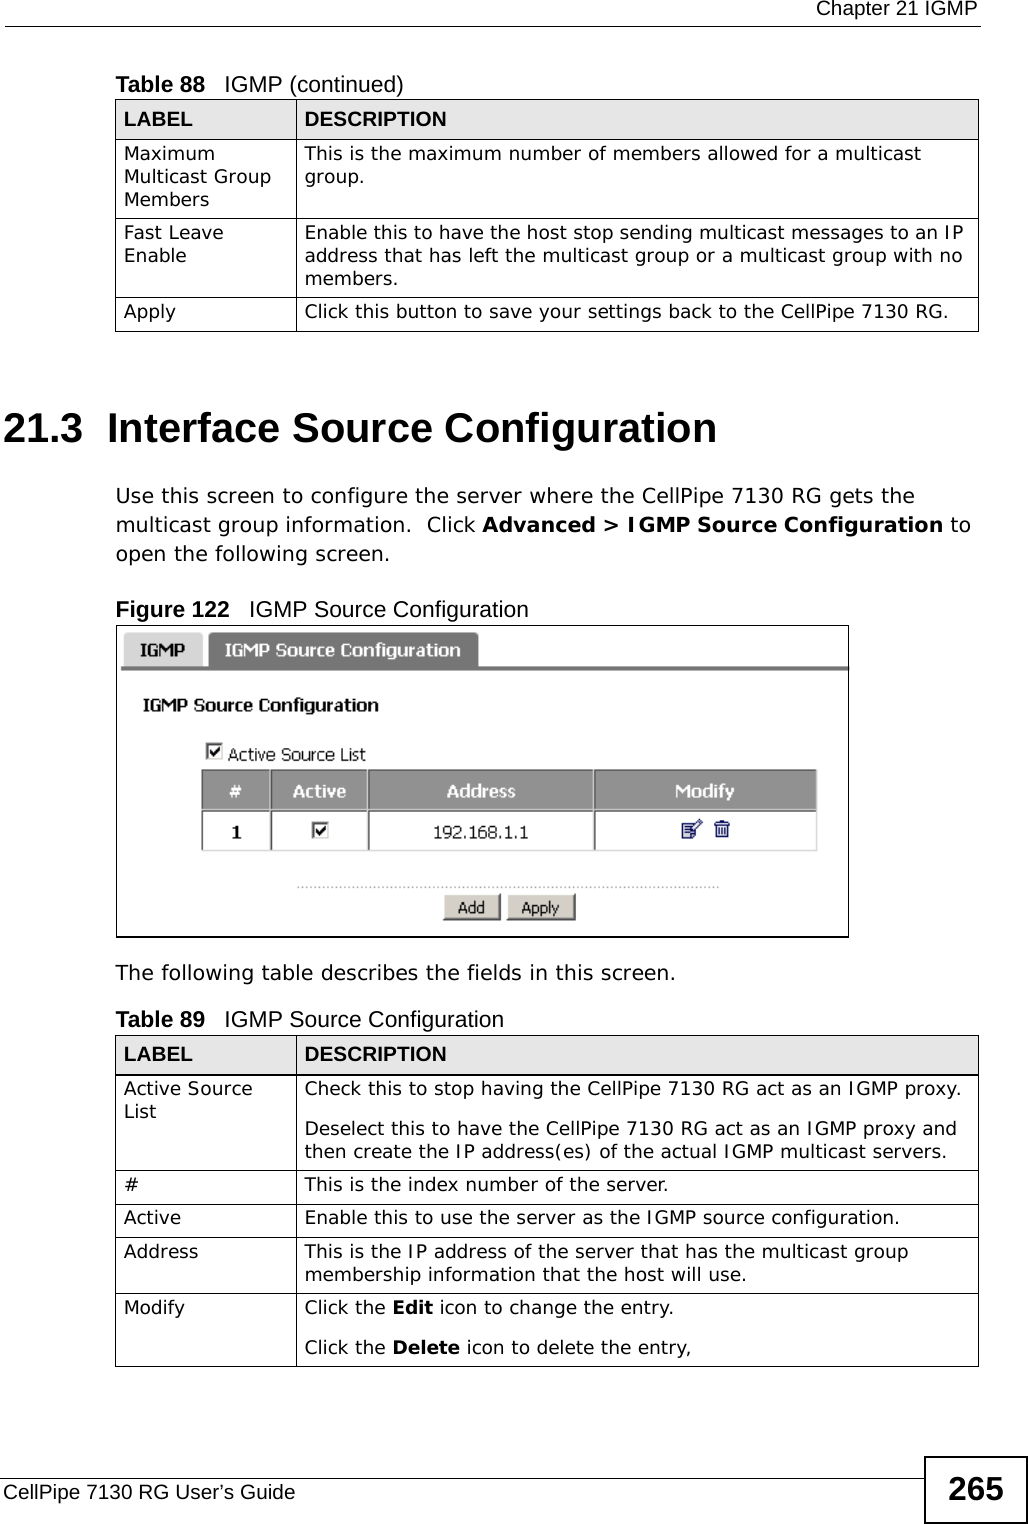  Chapter 21 IGMPCellPipe 7130 RG User’s Guide 26521.3  Interface Source ConfigurationUse this screen to configure the server where the CellPipe 7130 RG gets the multicast group information.  Click Advanced &gt; IGMP Source Configuration to open the following screen. Figure 122   IGMP Source Configuration The following table describes the fields in this screen.Maximum Multicast Group MembersThis is the maximum number of members allowed for a multicast group.Fast Leave Enable Enable this to have the host stop sending multicast messages to an IP address that has left the multicast group or a multicast group with no members.Apply Click this button to save your settings back to the CellPipe 7130 RG.Table 88   IGMP (continued)LABEL DESCRIPTIONTable 89   IGMP Source ConfigurationLABEL DESCRIPTIONActive Source List Check this to stop having the CellPipe 7130 RG act as an IGMP proxy.Deselect this to have the CellPipe 7130 RG act as an IGMP proxy and then create the IP address(es) of the actual IGMP multicast servers. #This is the index number of the server.Active Enable this to use the server as the IGMP source configuration.Address This is the IP address of the server that has the multicast group membership information that the host will use.Modify Click the Edit icon to change the entry.Click the Delete icon to delete the entry,